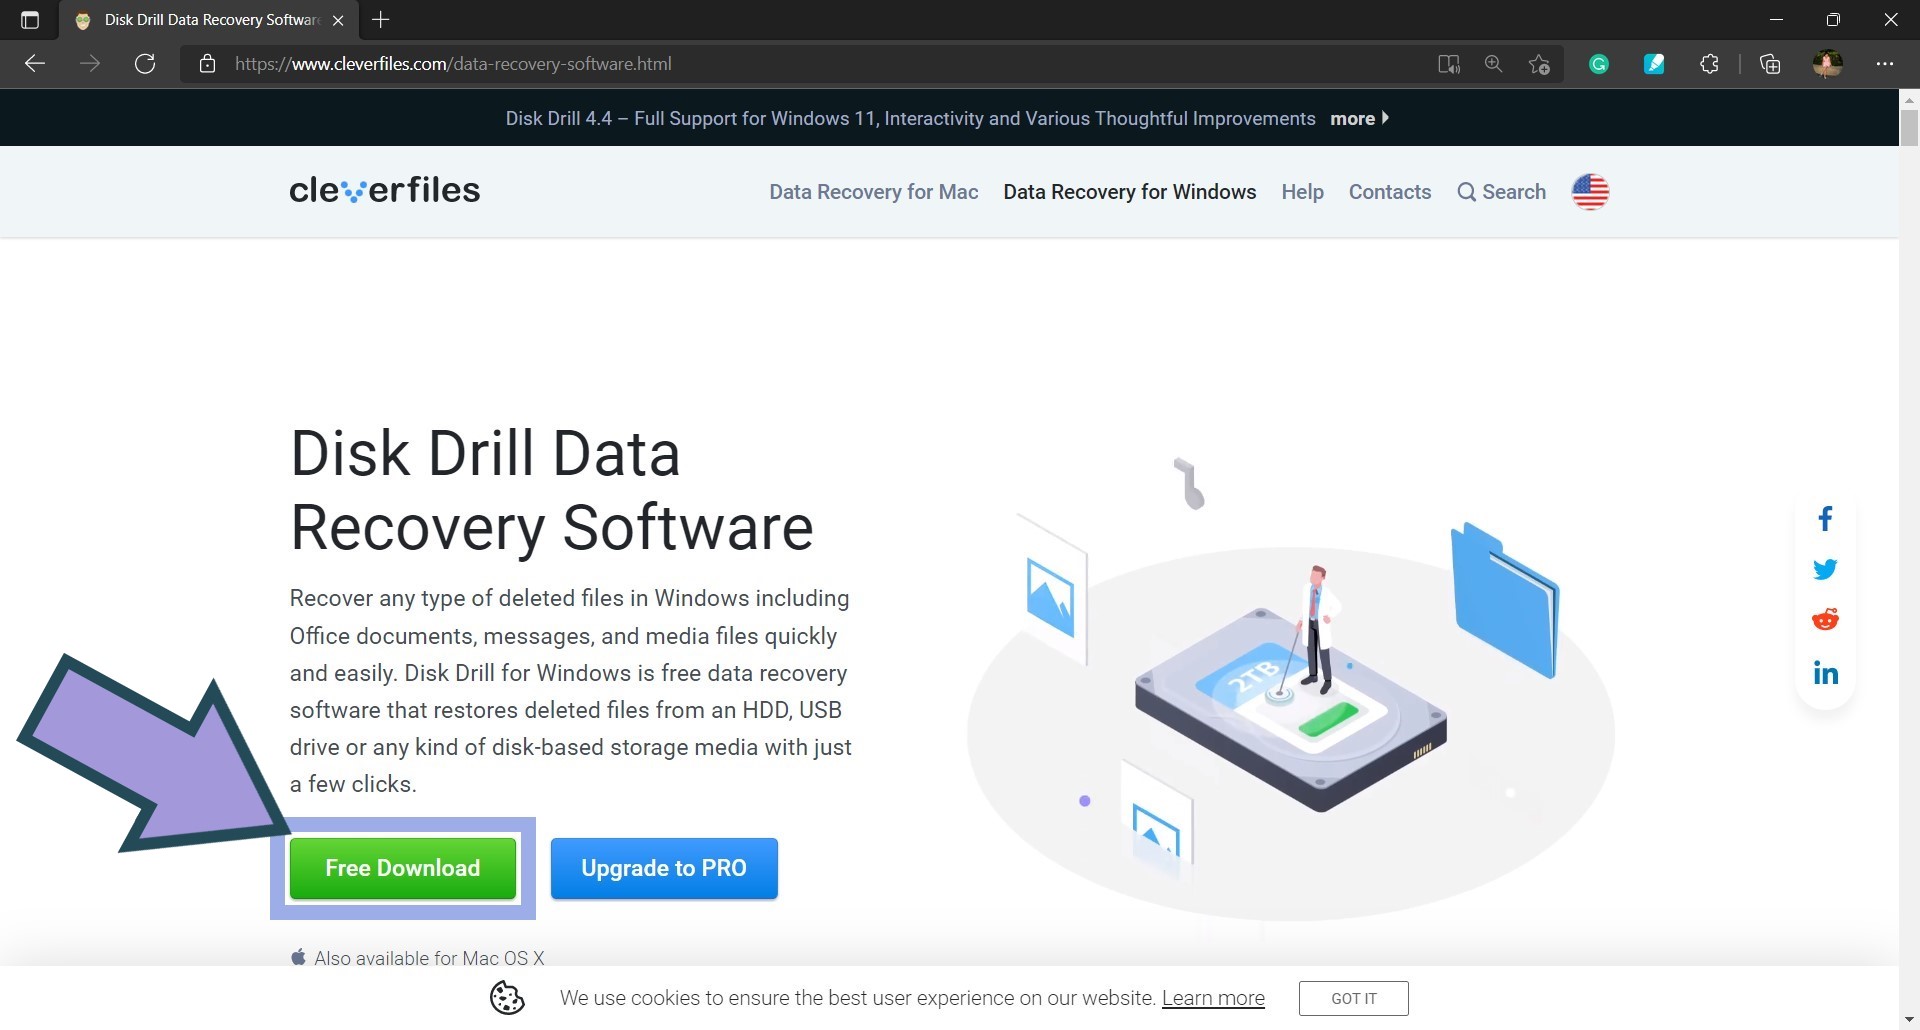 Disk Drill data recovery tool download page